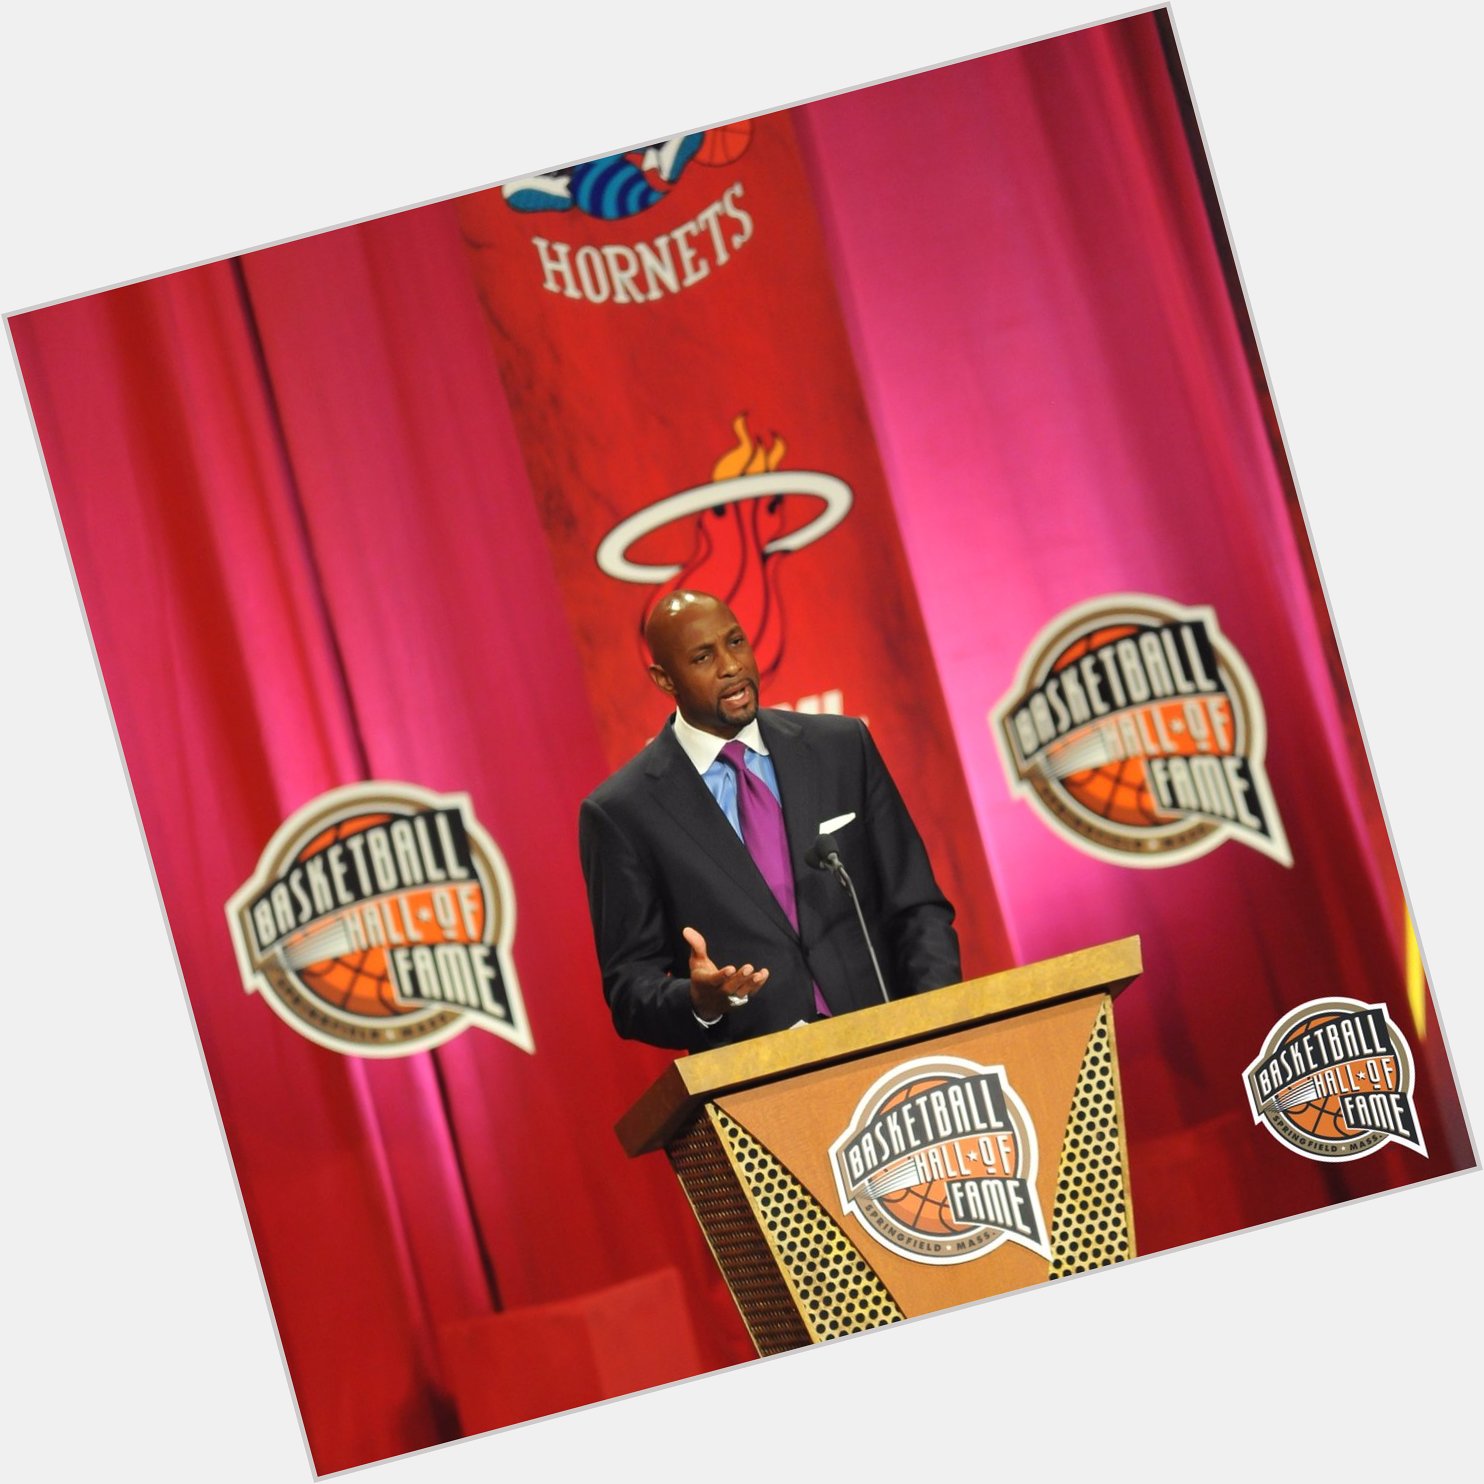 Hoophall: Remessage to wish 2014 class member Alonzo Mourning a Happy Birthday! 